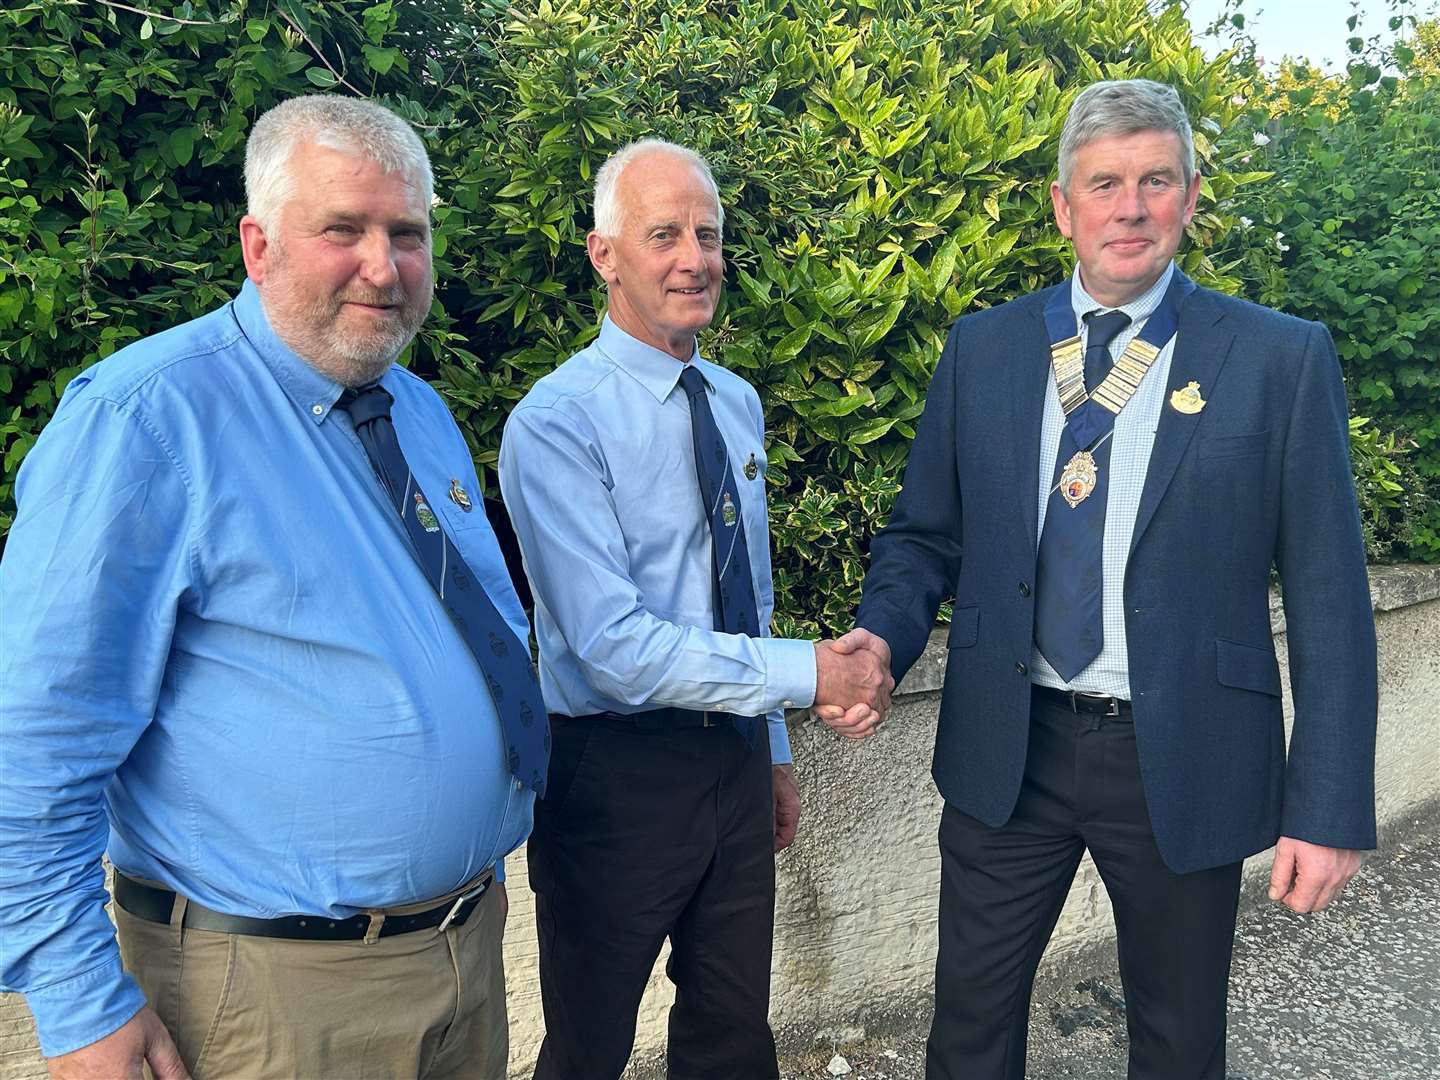 immediatepast president Billy Stewart (centre) congratulating Alan Cumming (right) on his appointment aspresident whilst junior vice president Brian Ross (left) looks on.